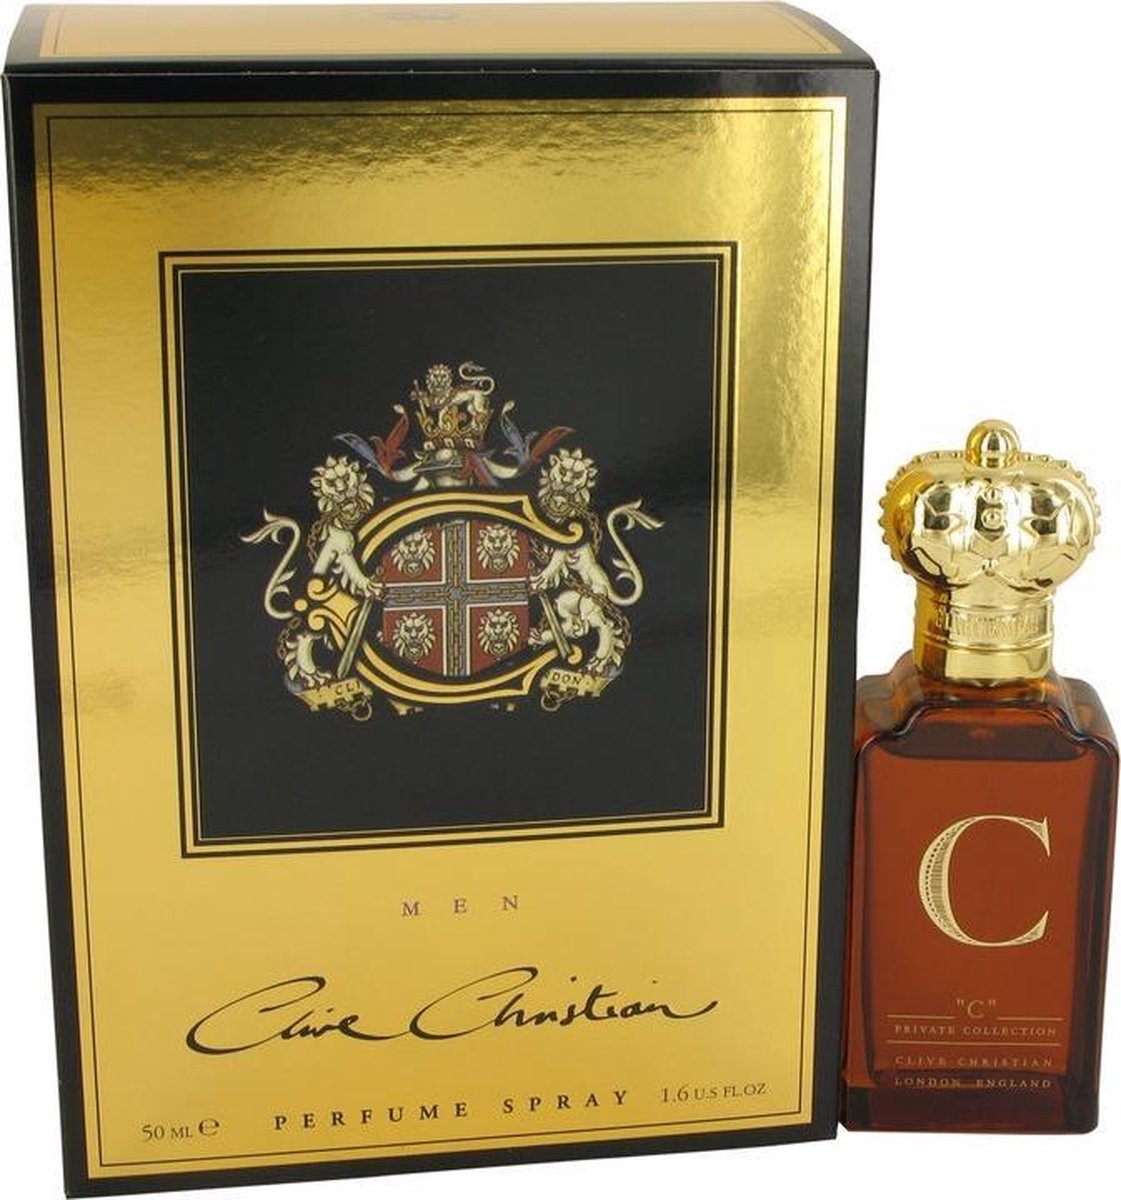 Clive Christian C by Clive Christian 50 ml - Perfume Spray